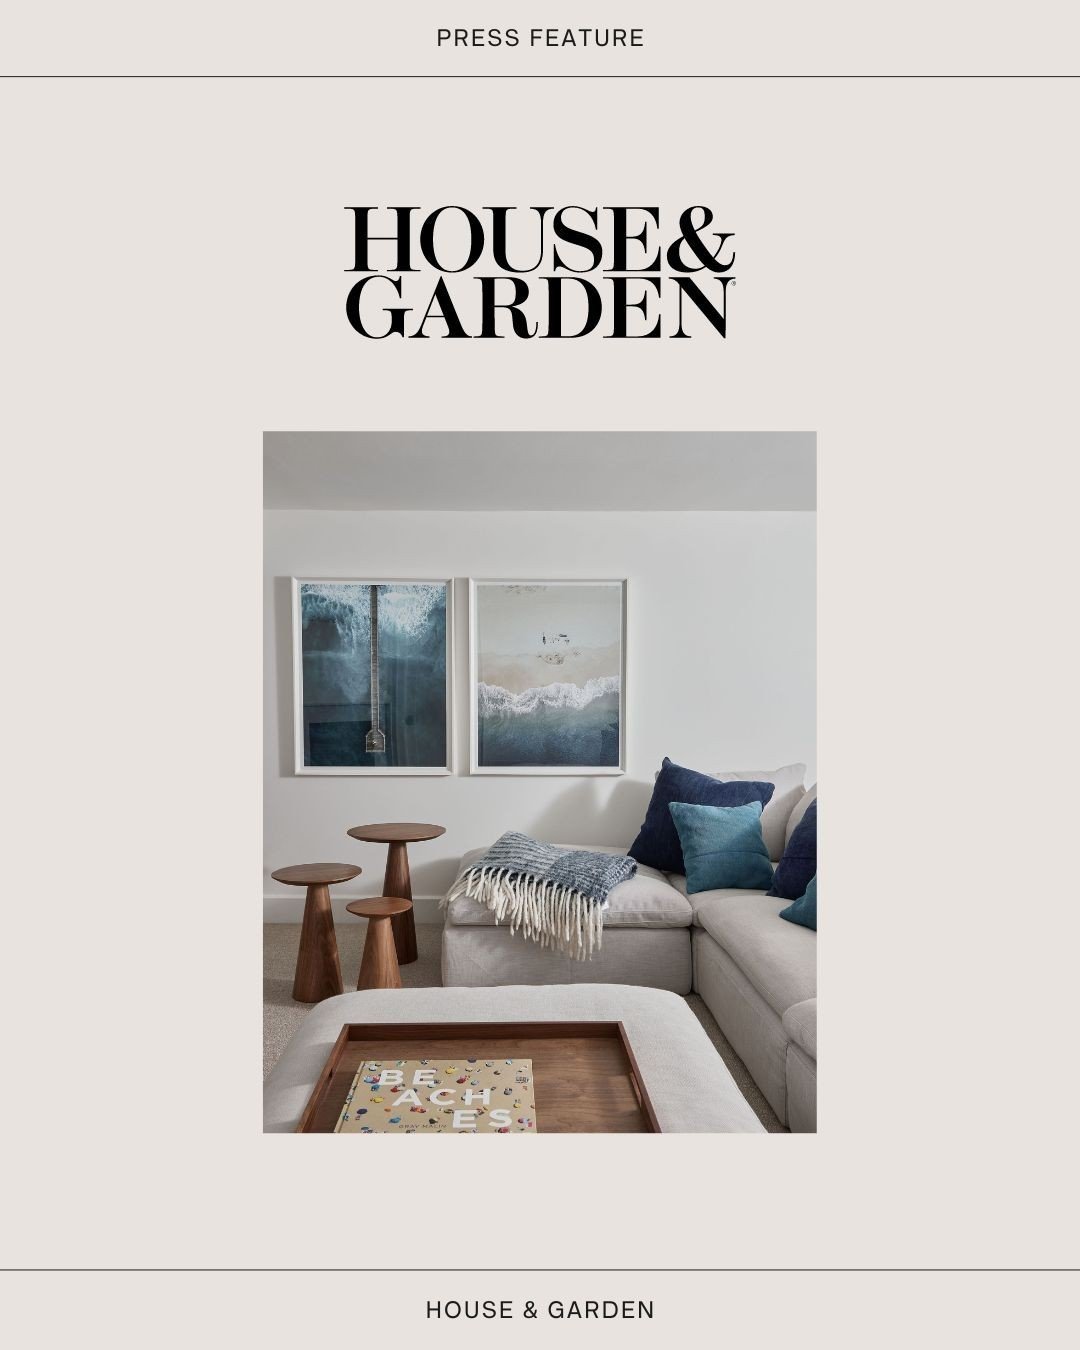 We are proud to share our Beaches Residence project featured on @houseandgardensa  Head to the LinkedIn bio to read the whole story and get all the details on this beautiful custom home.⁠
⁠
&quot;Explore this modern Toronto home with unexpected luxur